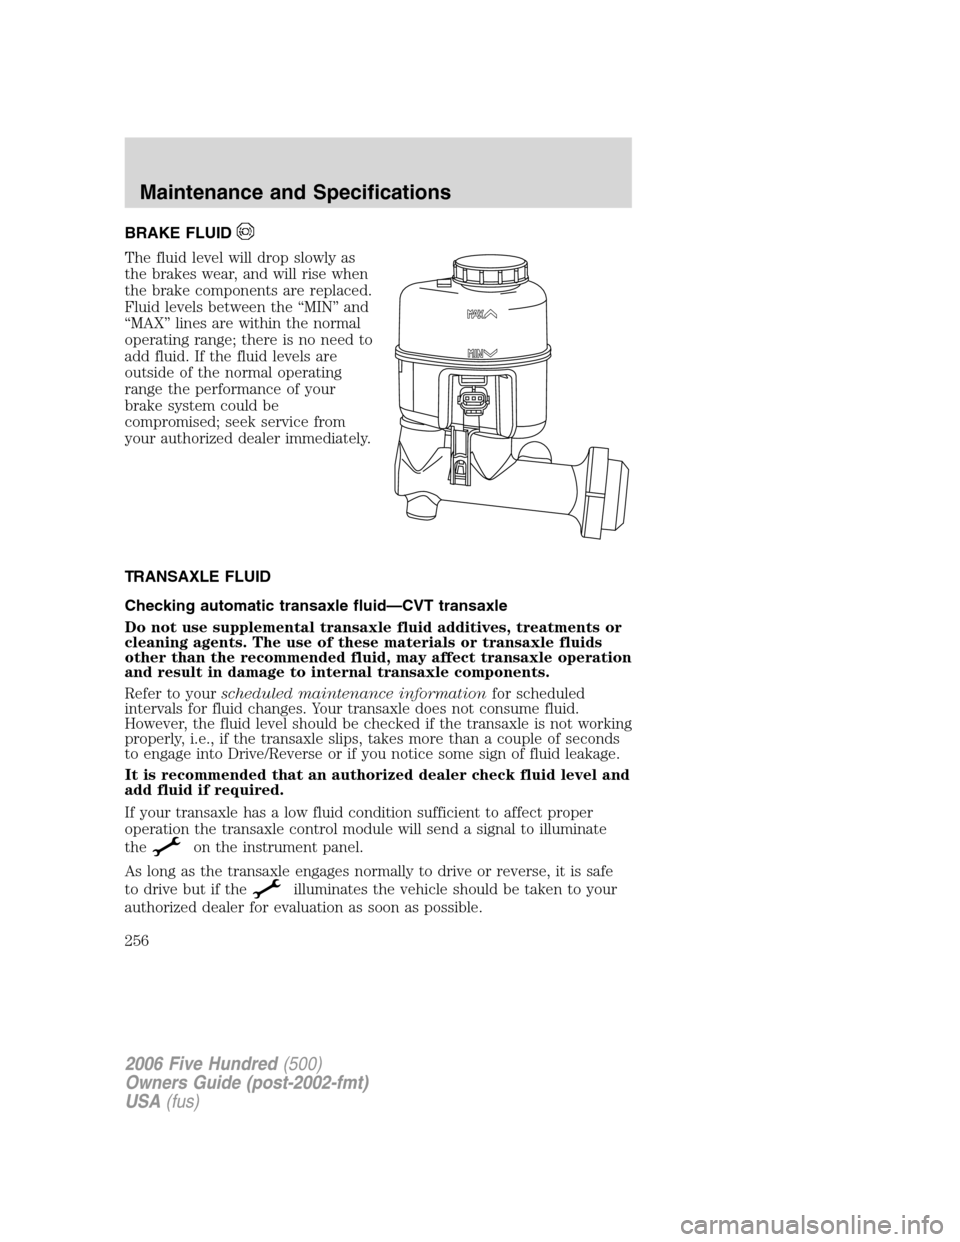 FORD FIVE HUNDRED 2006 D258 / 1.G Service Manual BRAKE FLUID
The fluid level will drop slowly as
the brakes wear, and will rise when
the brake components are replaced.
Fluid levels between the “MIN” and
“MAX” lines are within the normal
oper